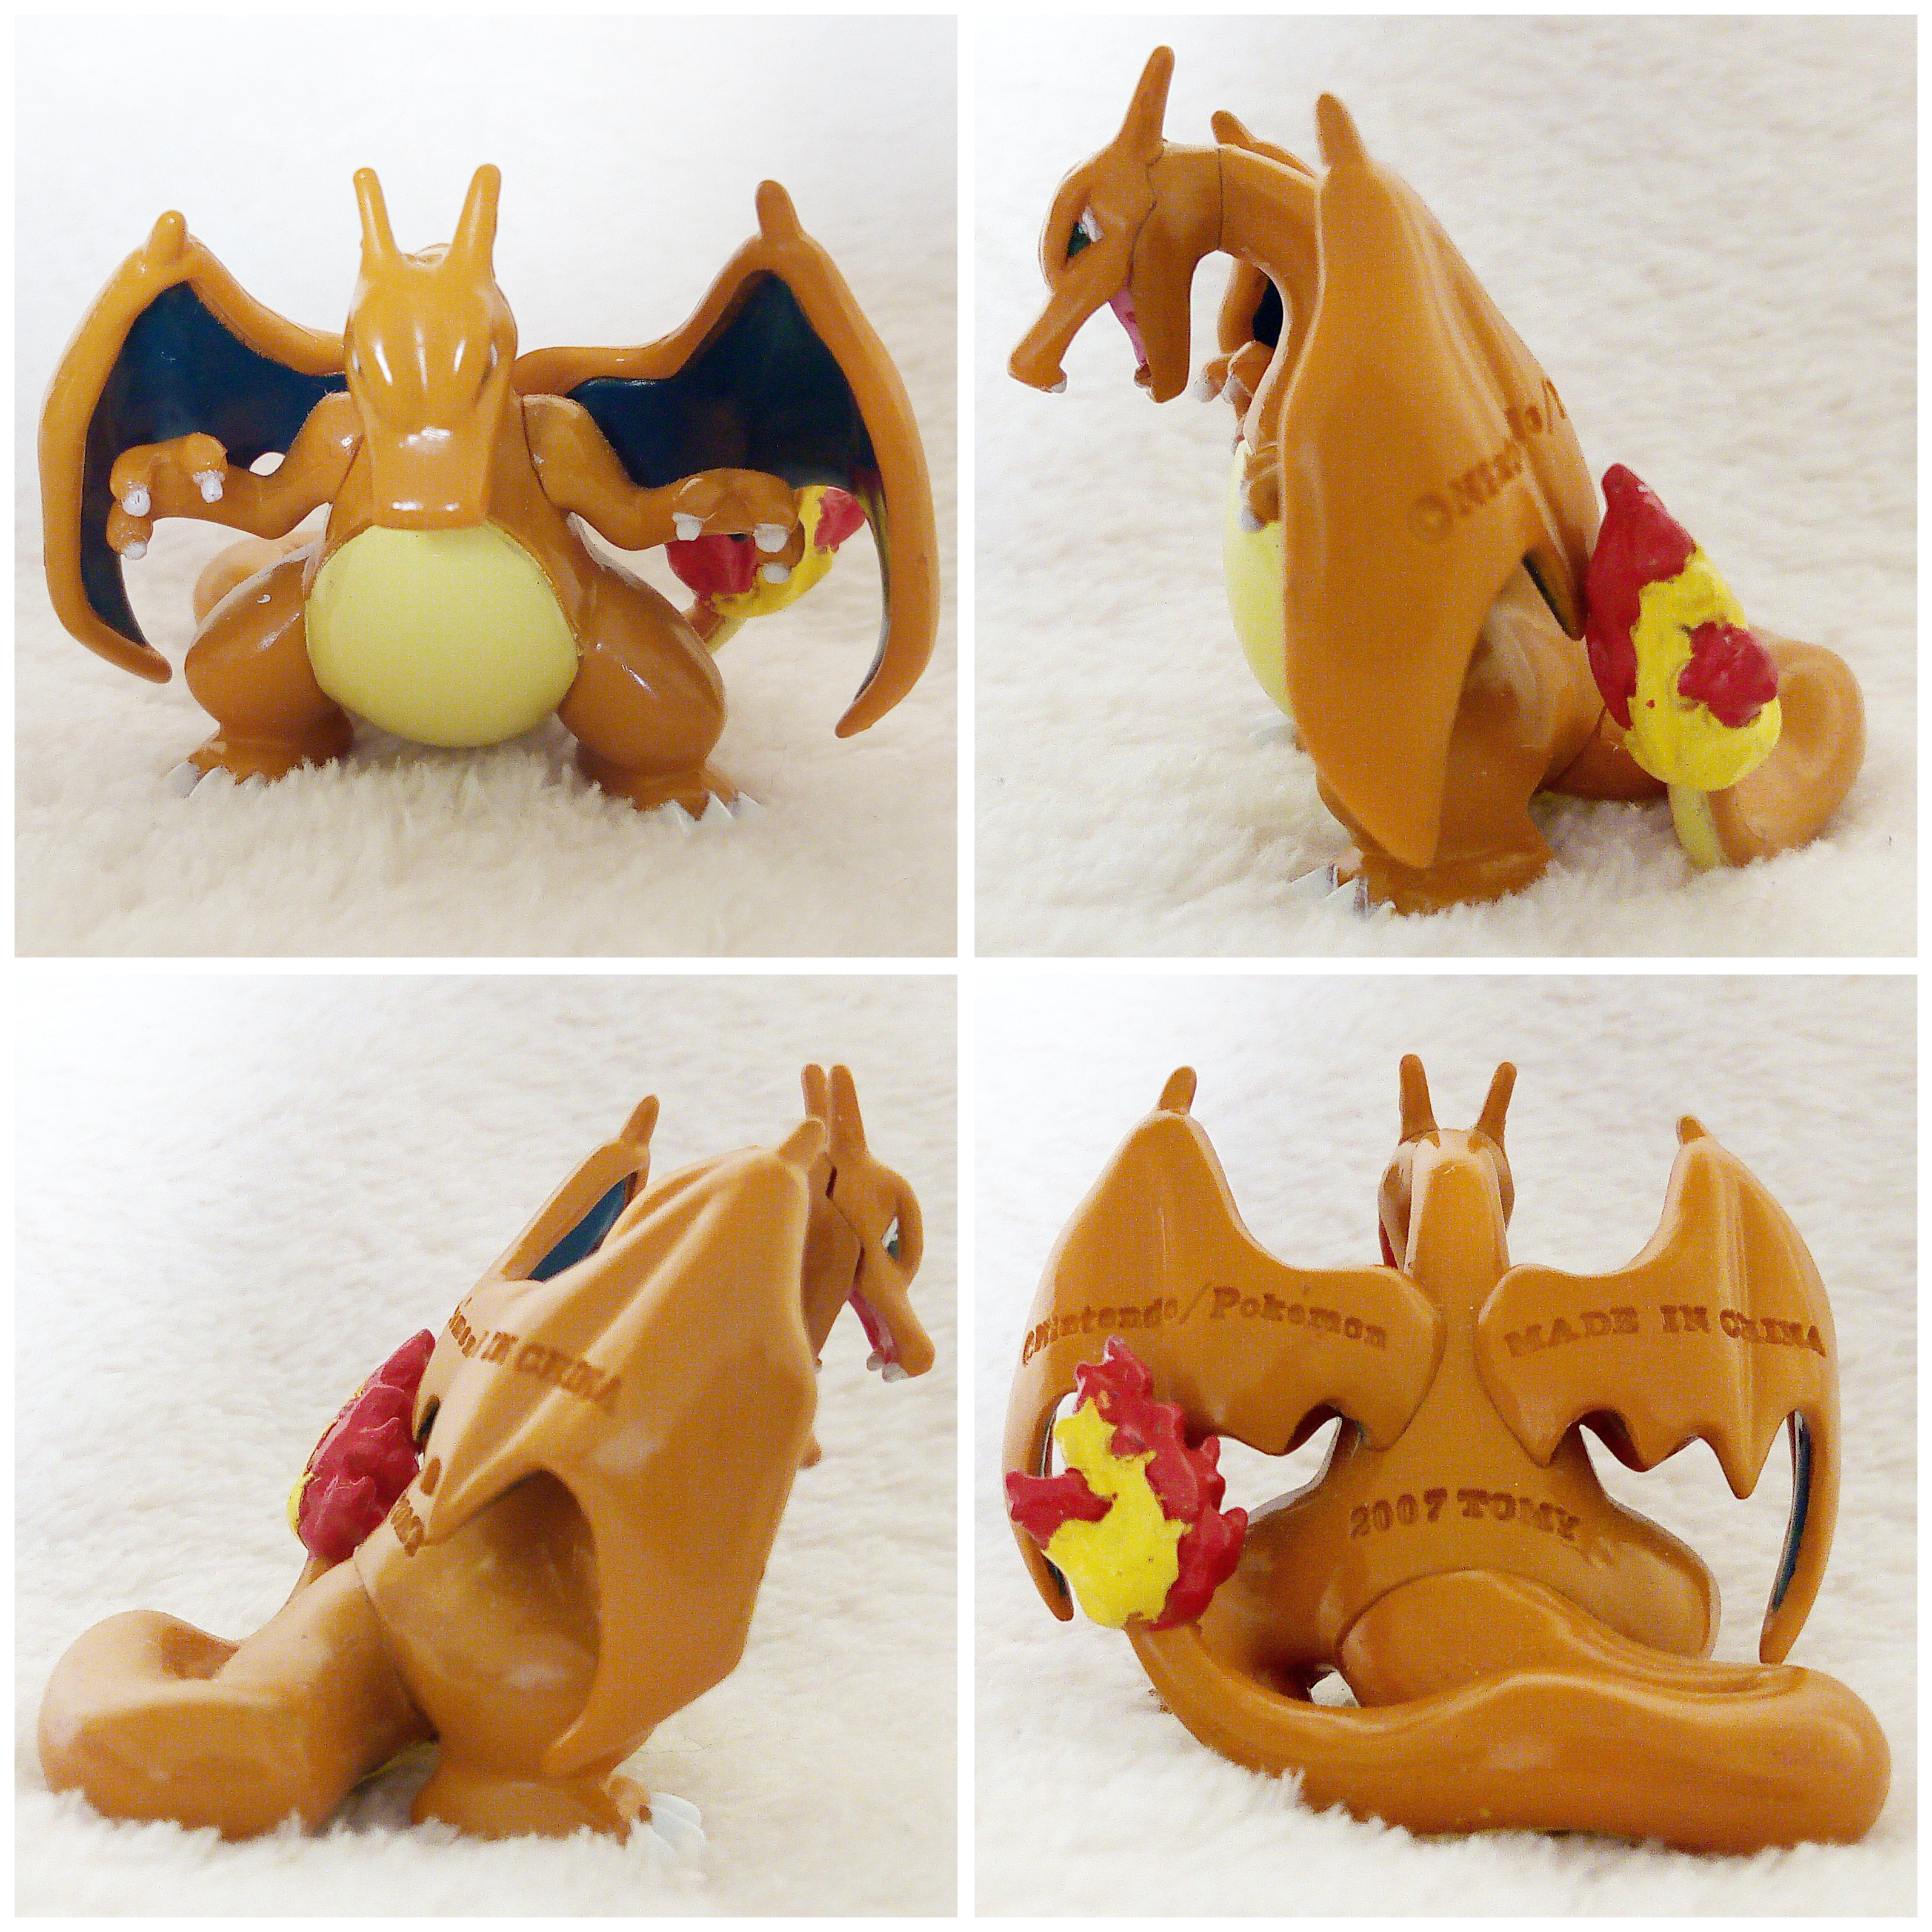 A front, left, right and back view of the Pokémon Tomy figure Charizard alternative